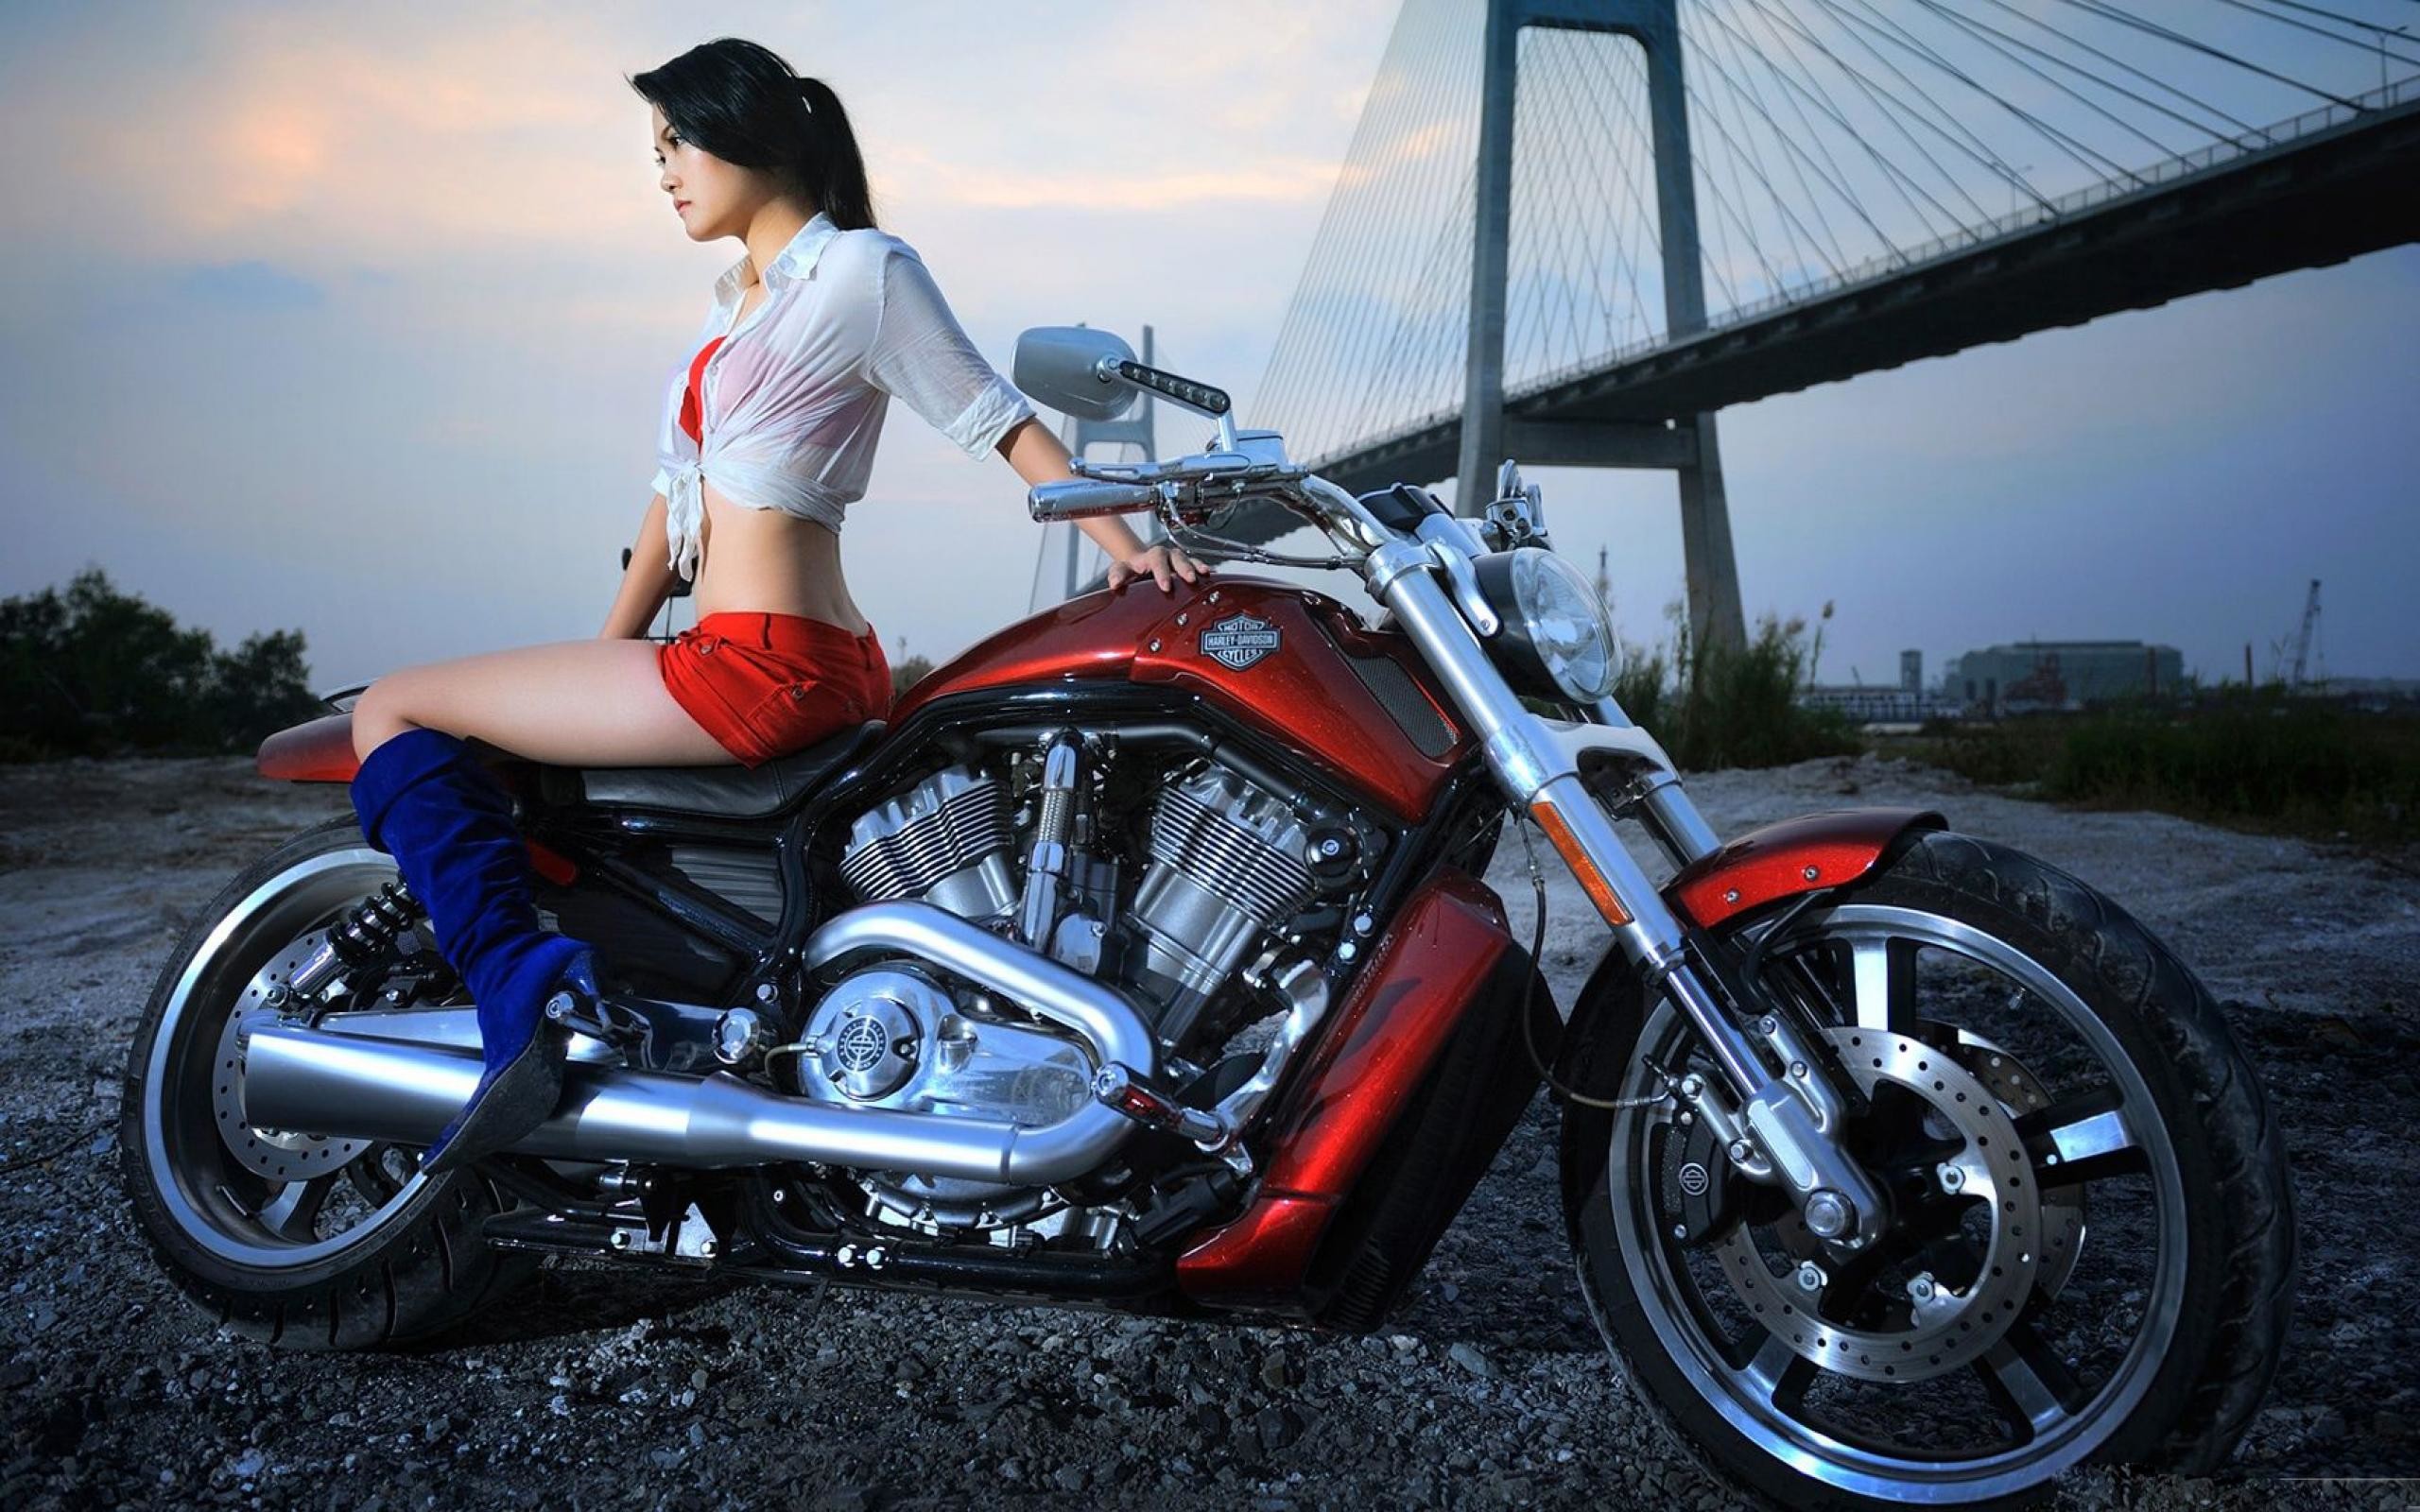 2560x1600 Download Wallpapers Sexy Girls Music Harley Davidson Motorcycles Best